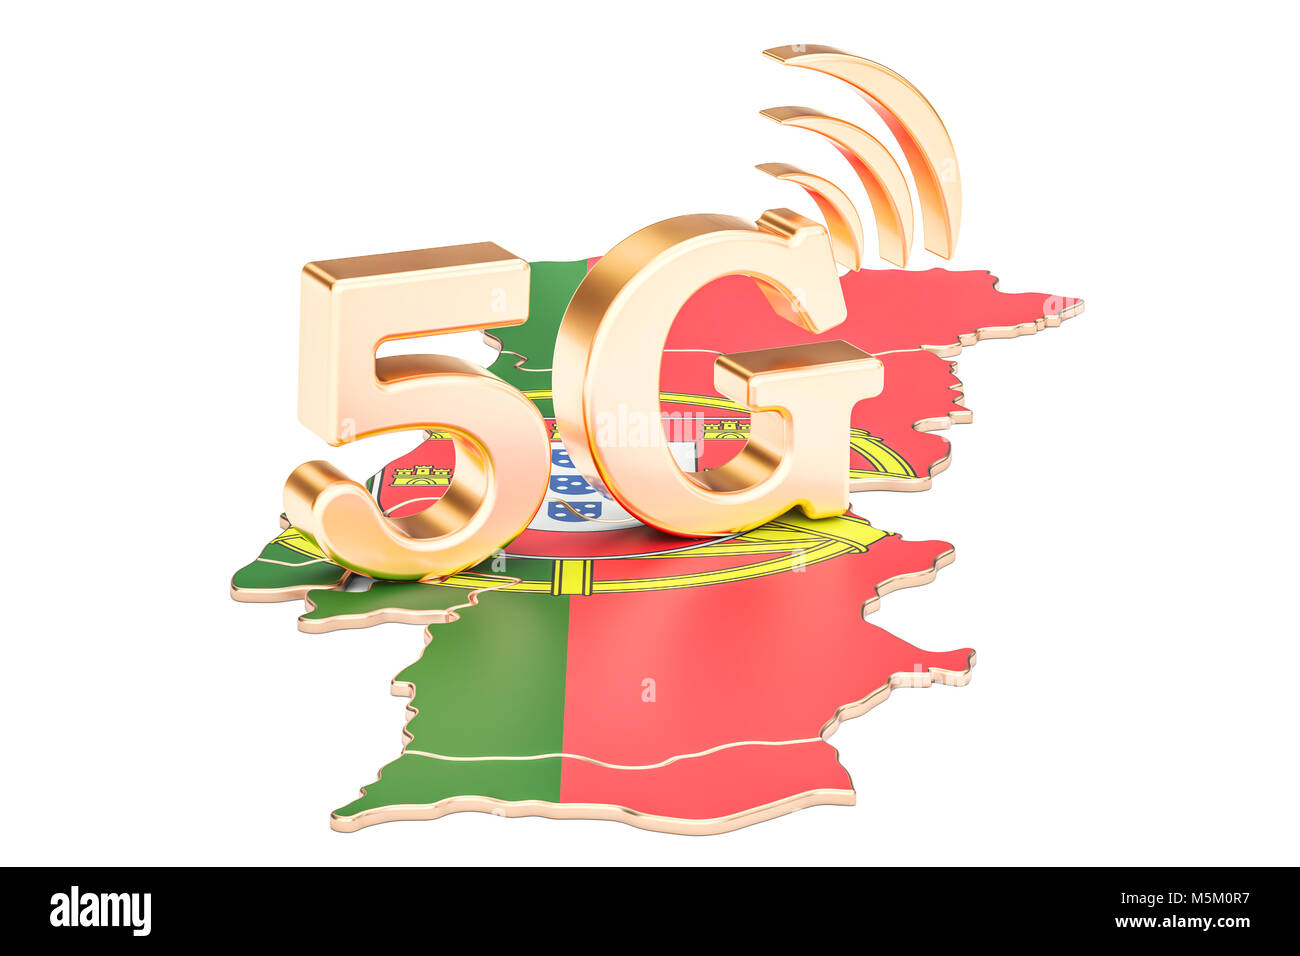 5G in Portugal concept, 3D rendering isolated on white background Stock Photo